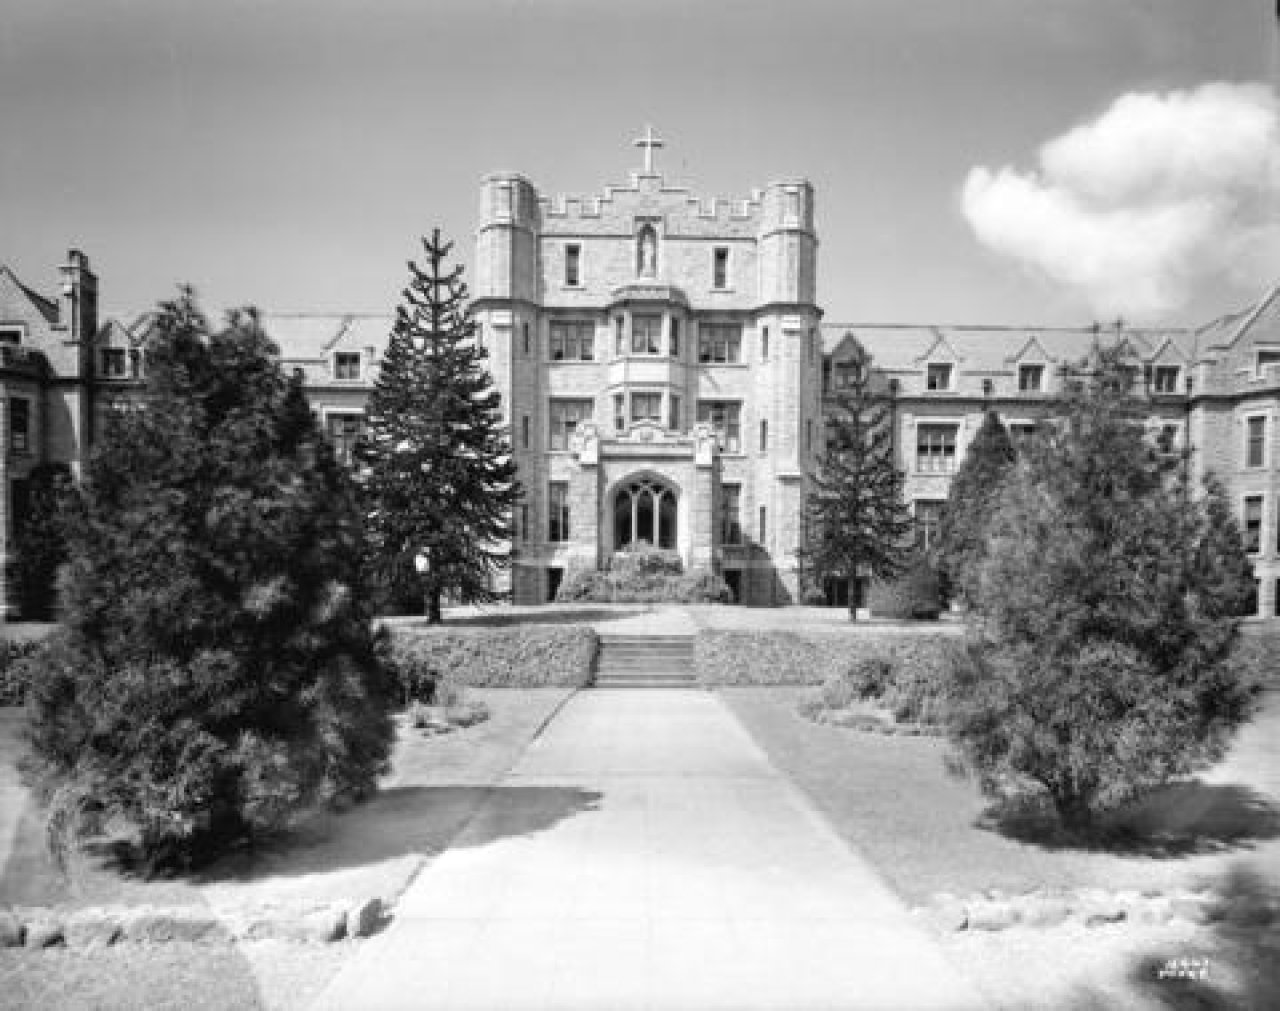 Convent of the Sacred Heart 1944
Source: City of Vancouver Archives Item : Bu N524.3 - [Convent of the Sacred Heart]